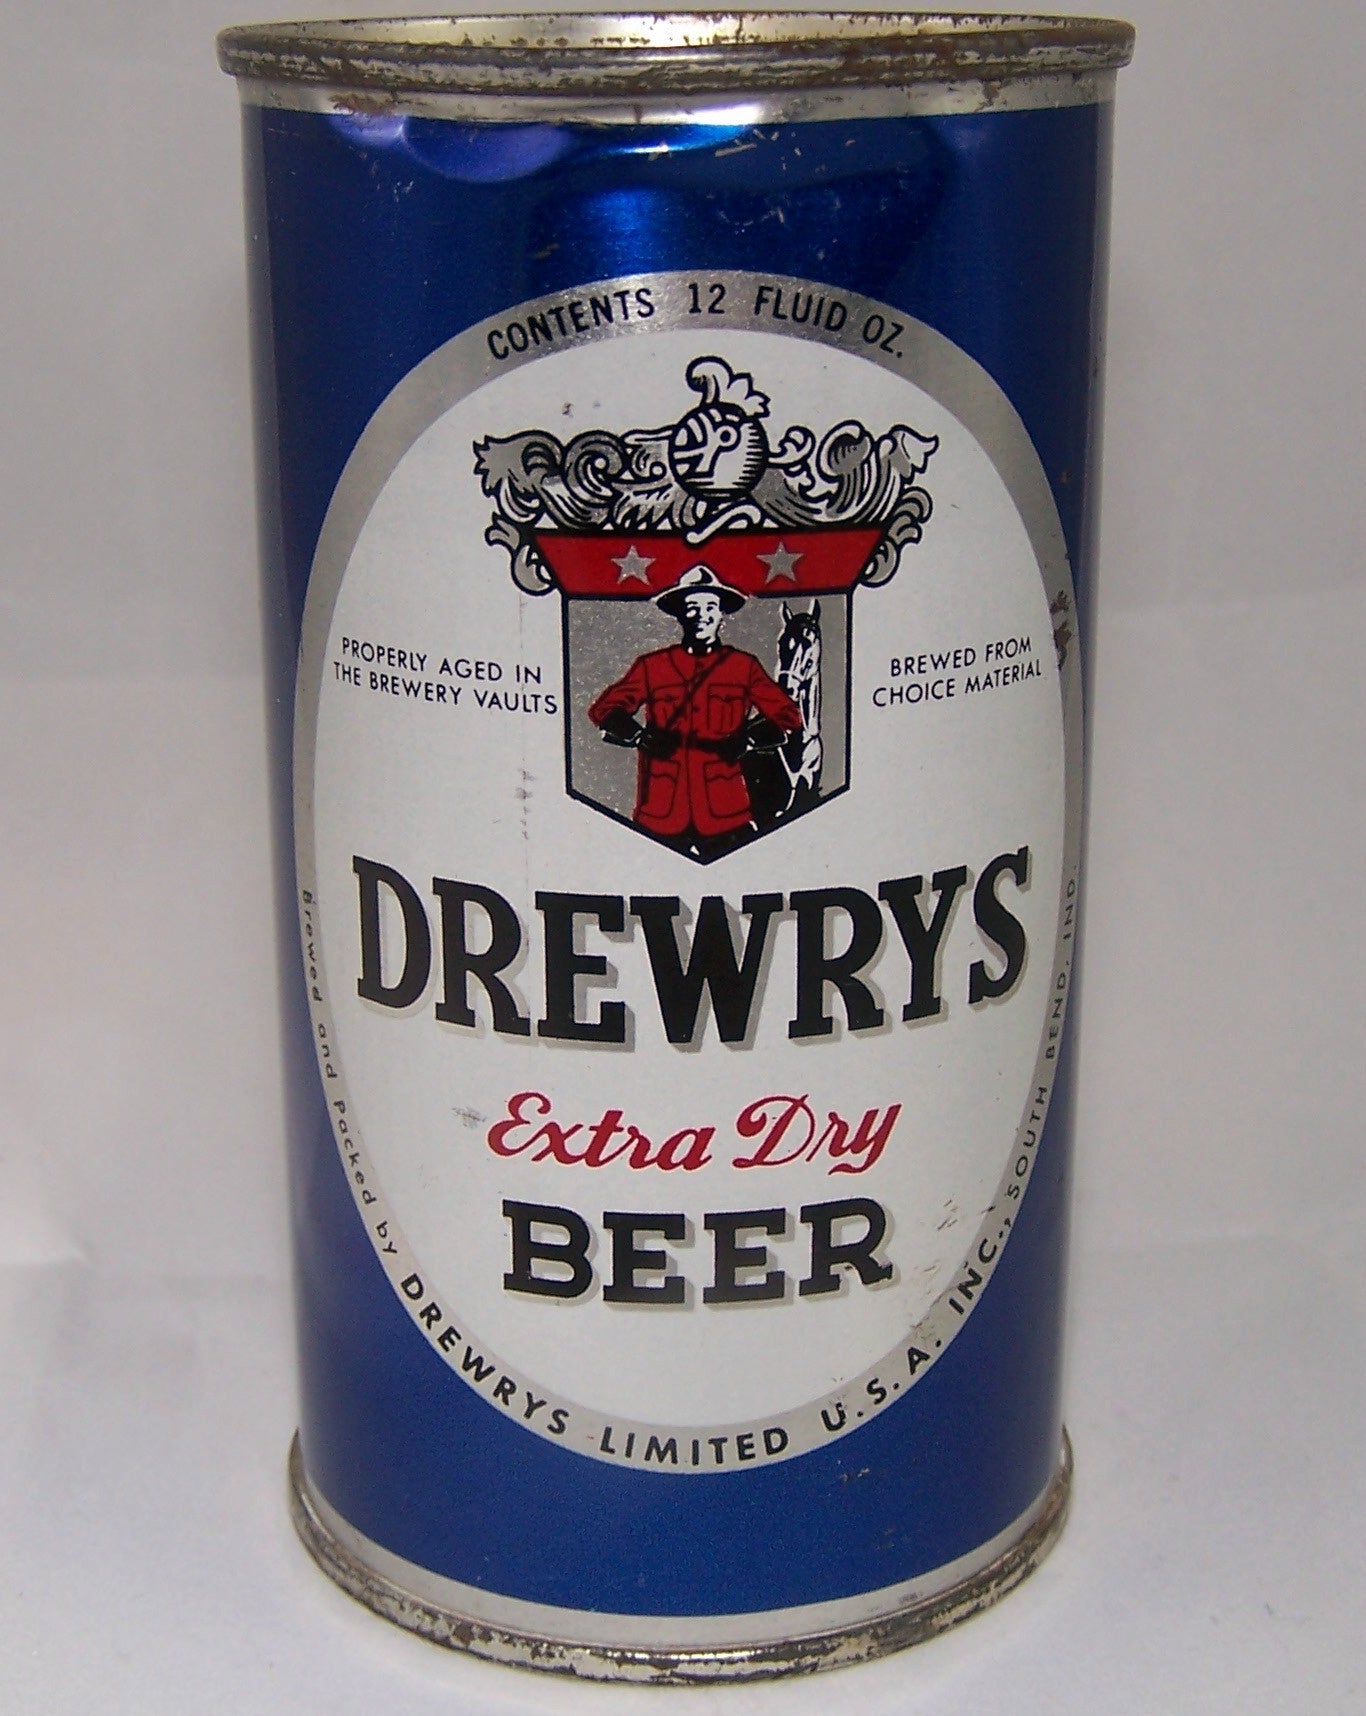 Drewrys Extra Dry Beer, USBC N.L Grade 1/1+ Sold on 09/15/16